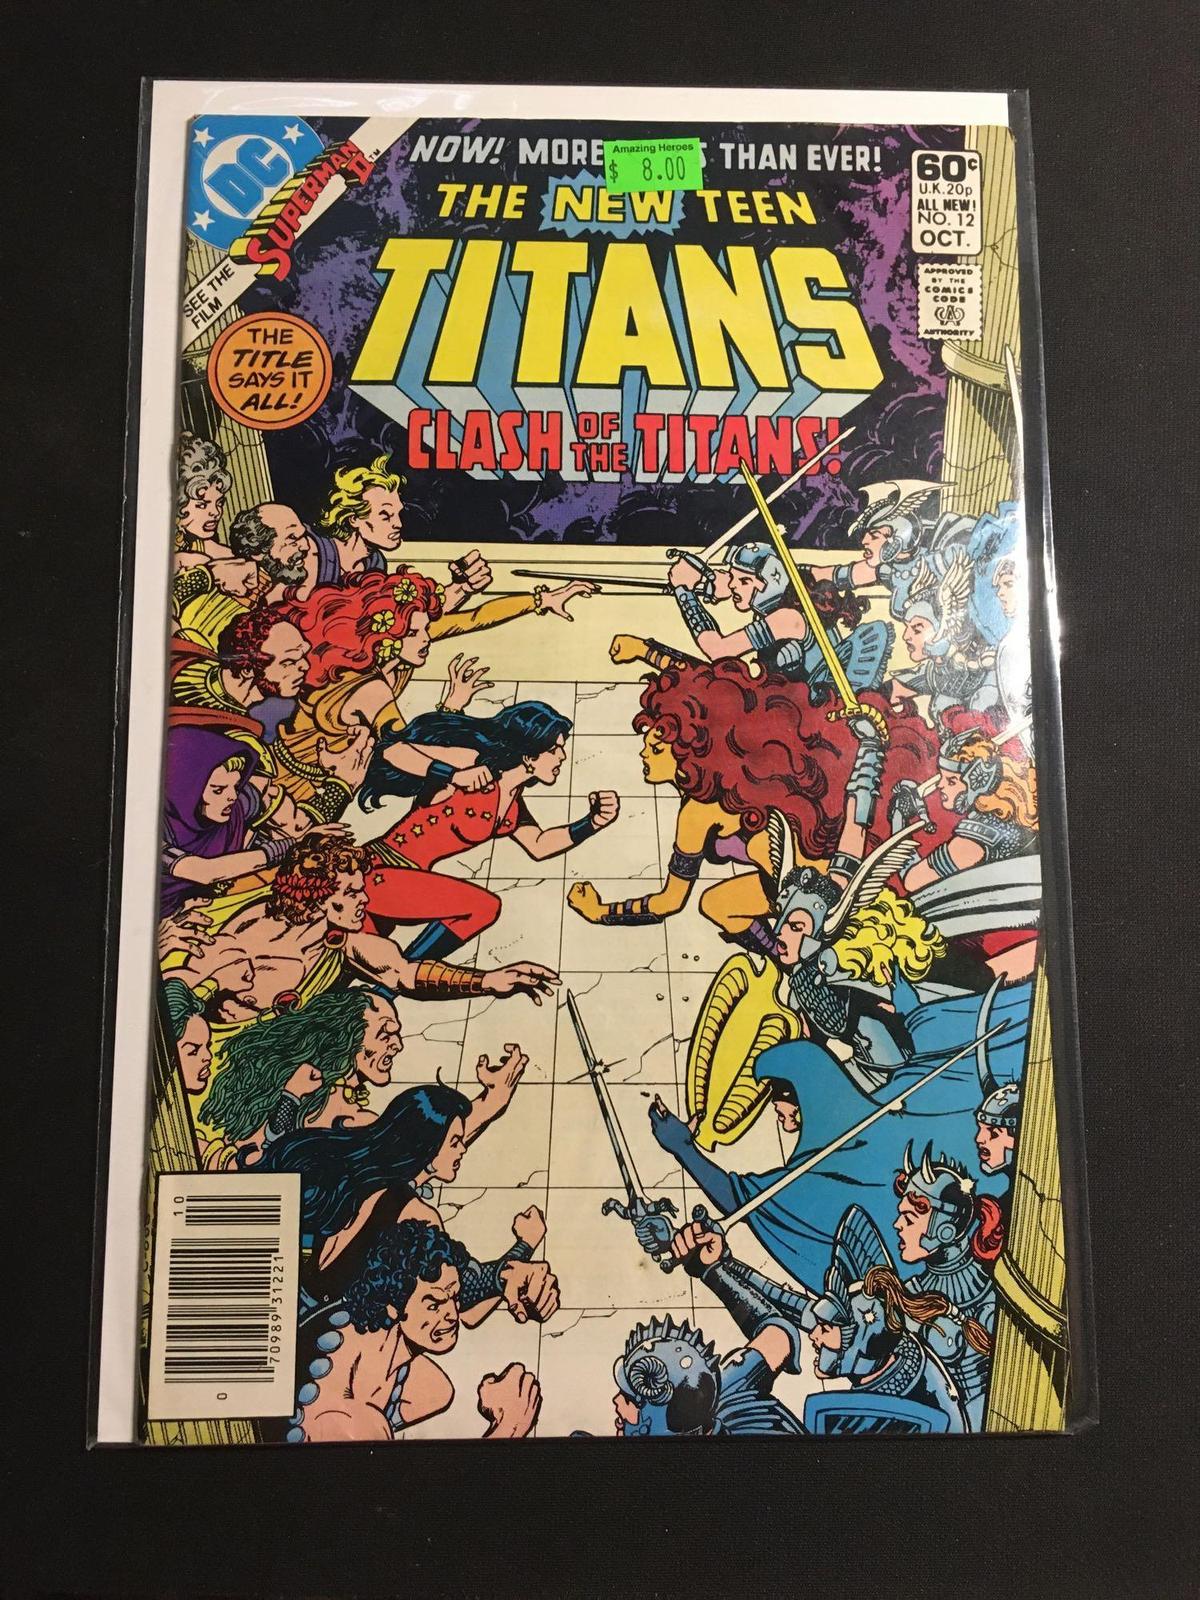 The New Teen Titans #12 Comic Book from Amazing Collection B